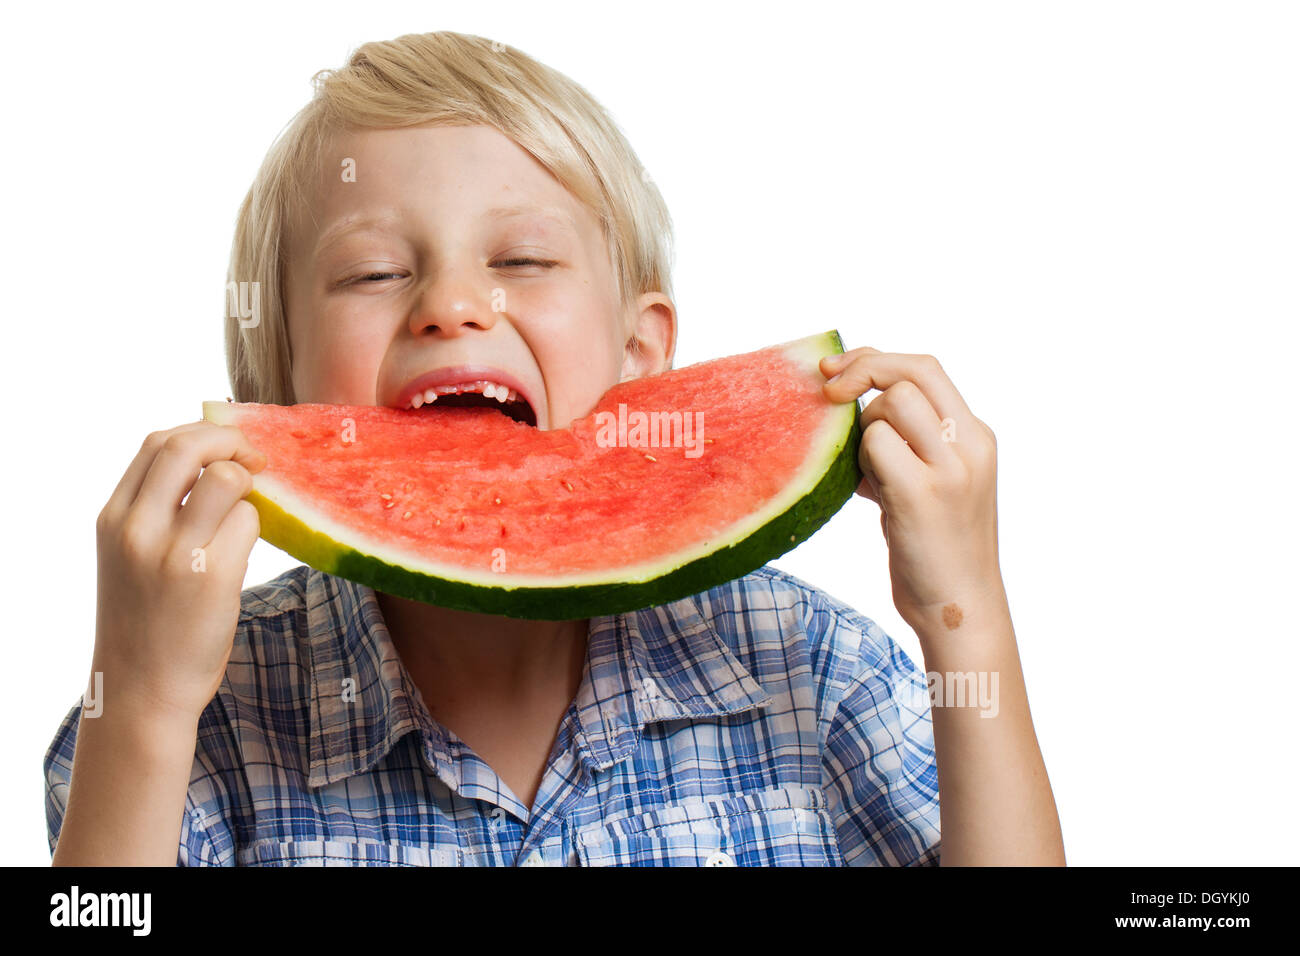 A young boy taking big bite of juicy slice of watermelon. Isolated on white. Stock Photo